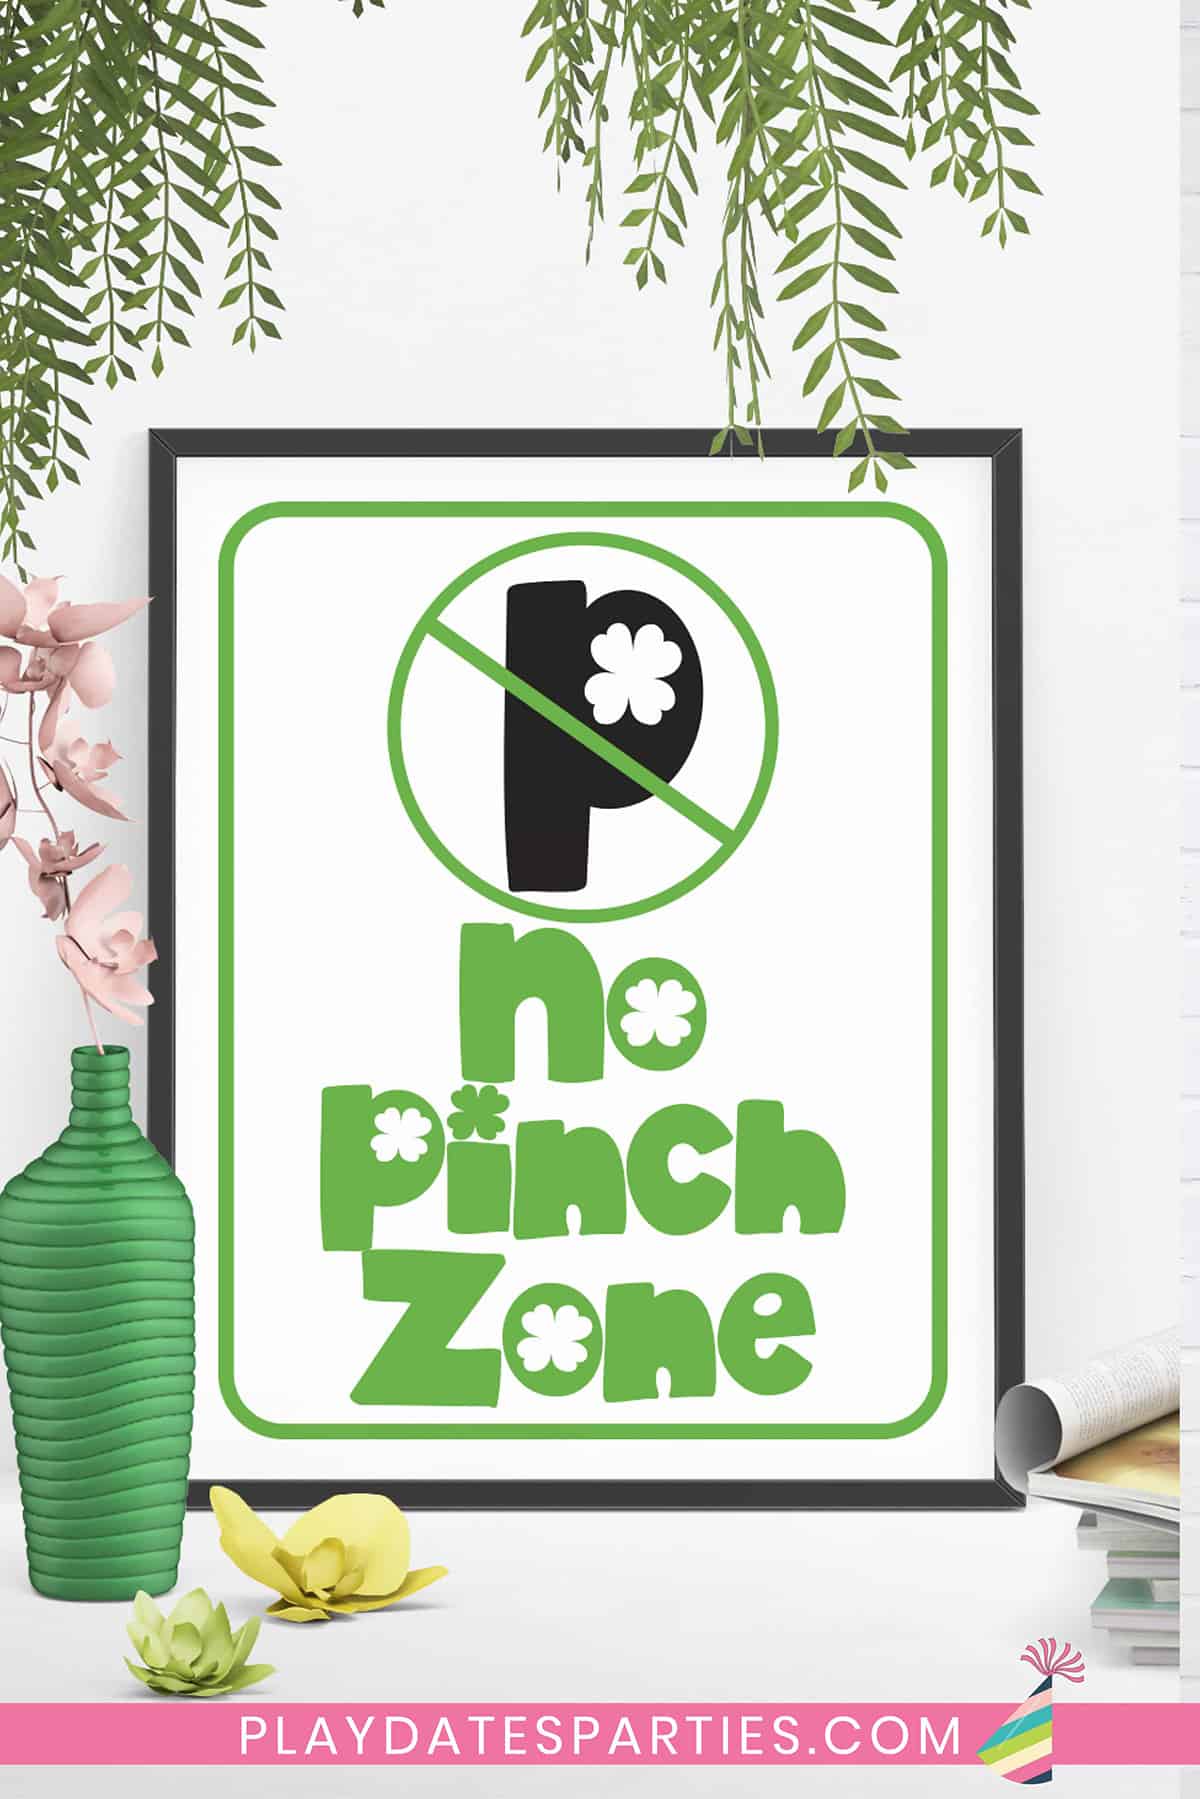 No Pinch Zone St. Patrick's Day Signs